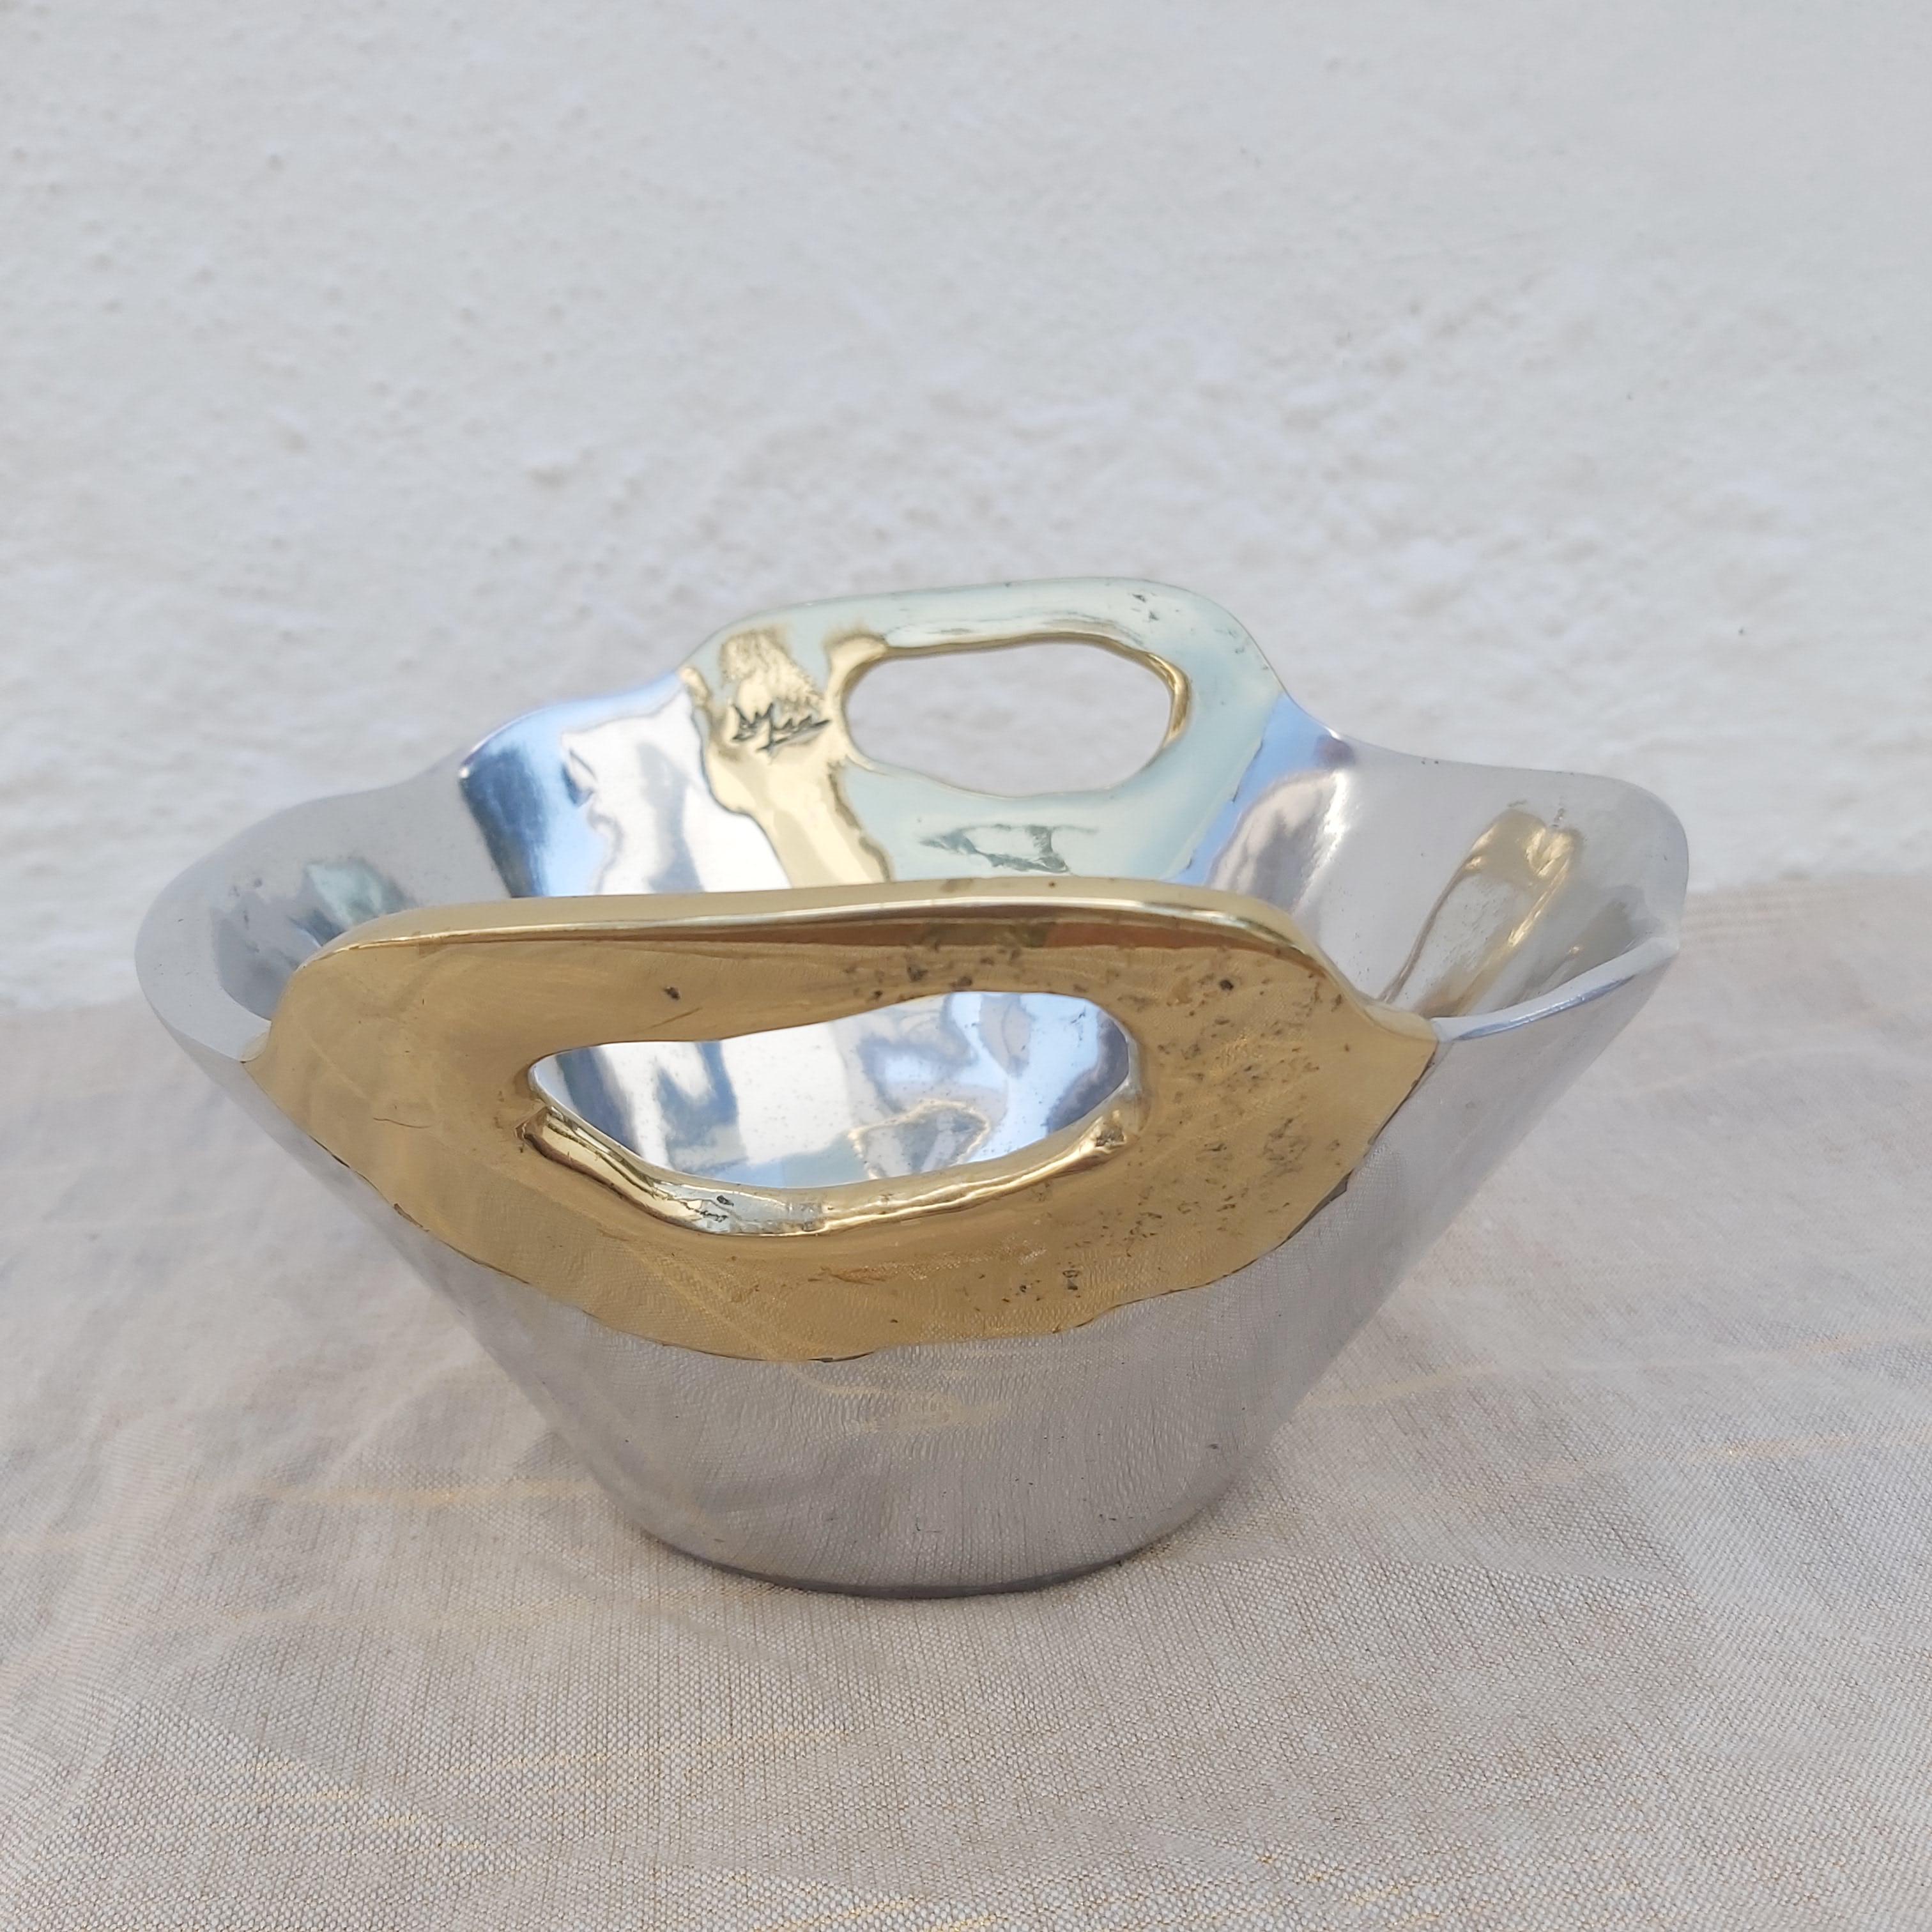 The small Basket bowl was created by David Marshall, from sand cast aluminium and brass.
All our pieces are handmade, mounted and finished in out foundry and workshop in Spain.
It is certified authentic by the Artist David Marshall.

 